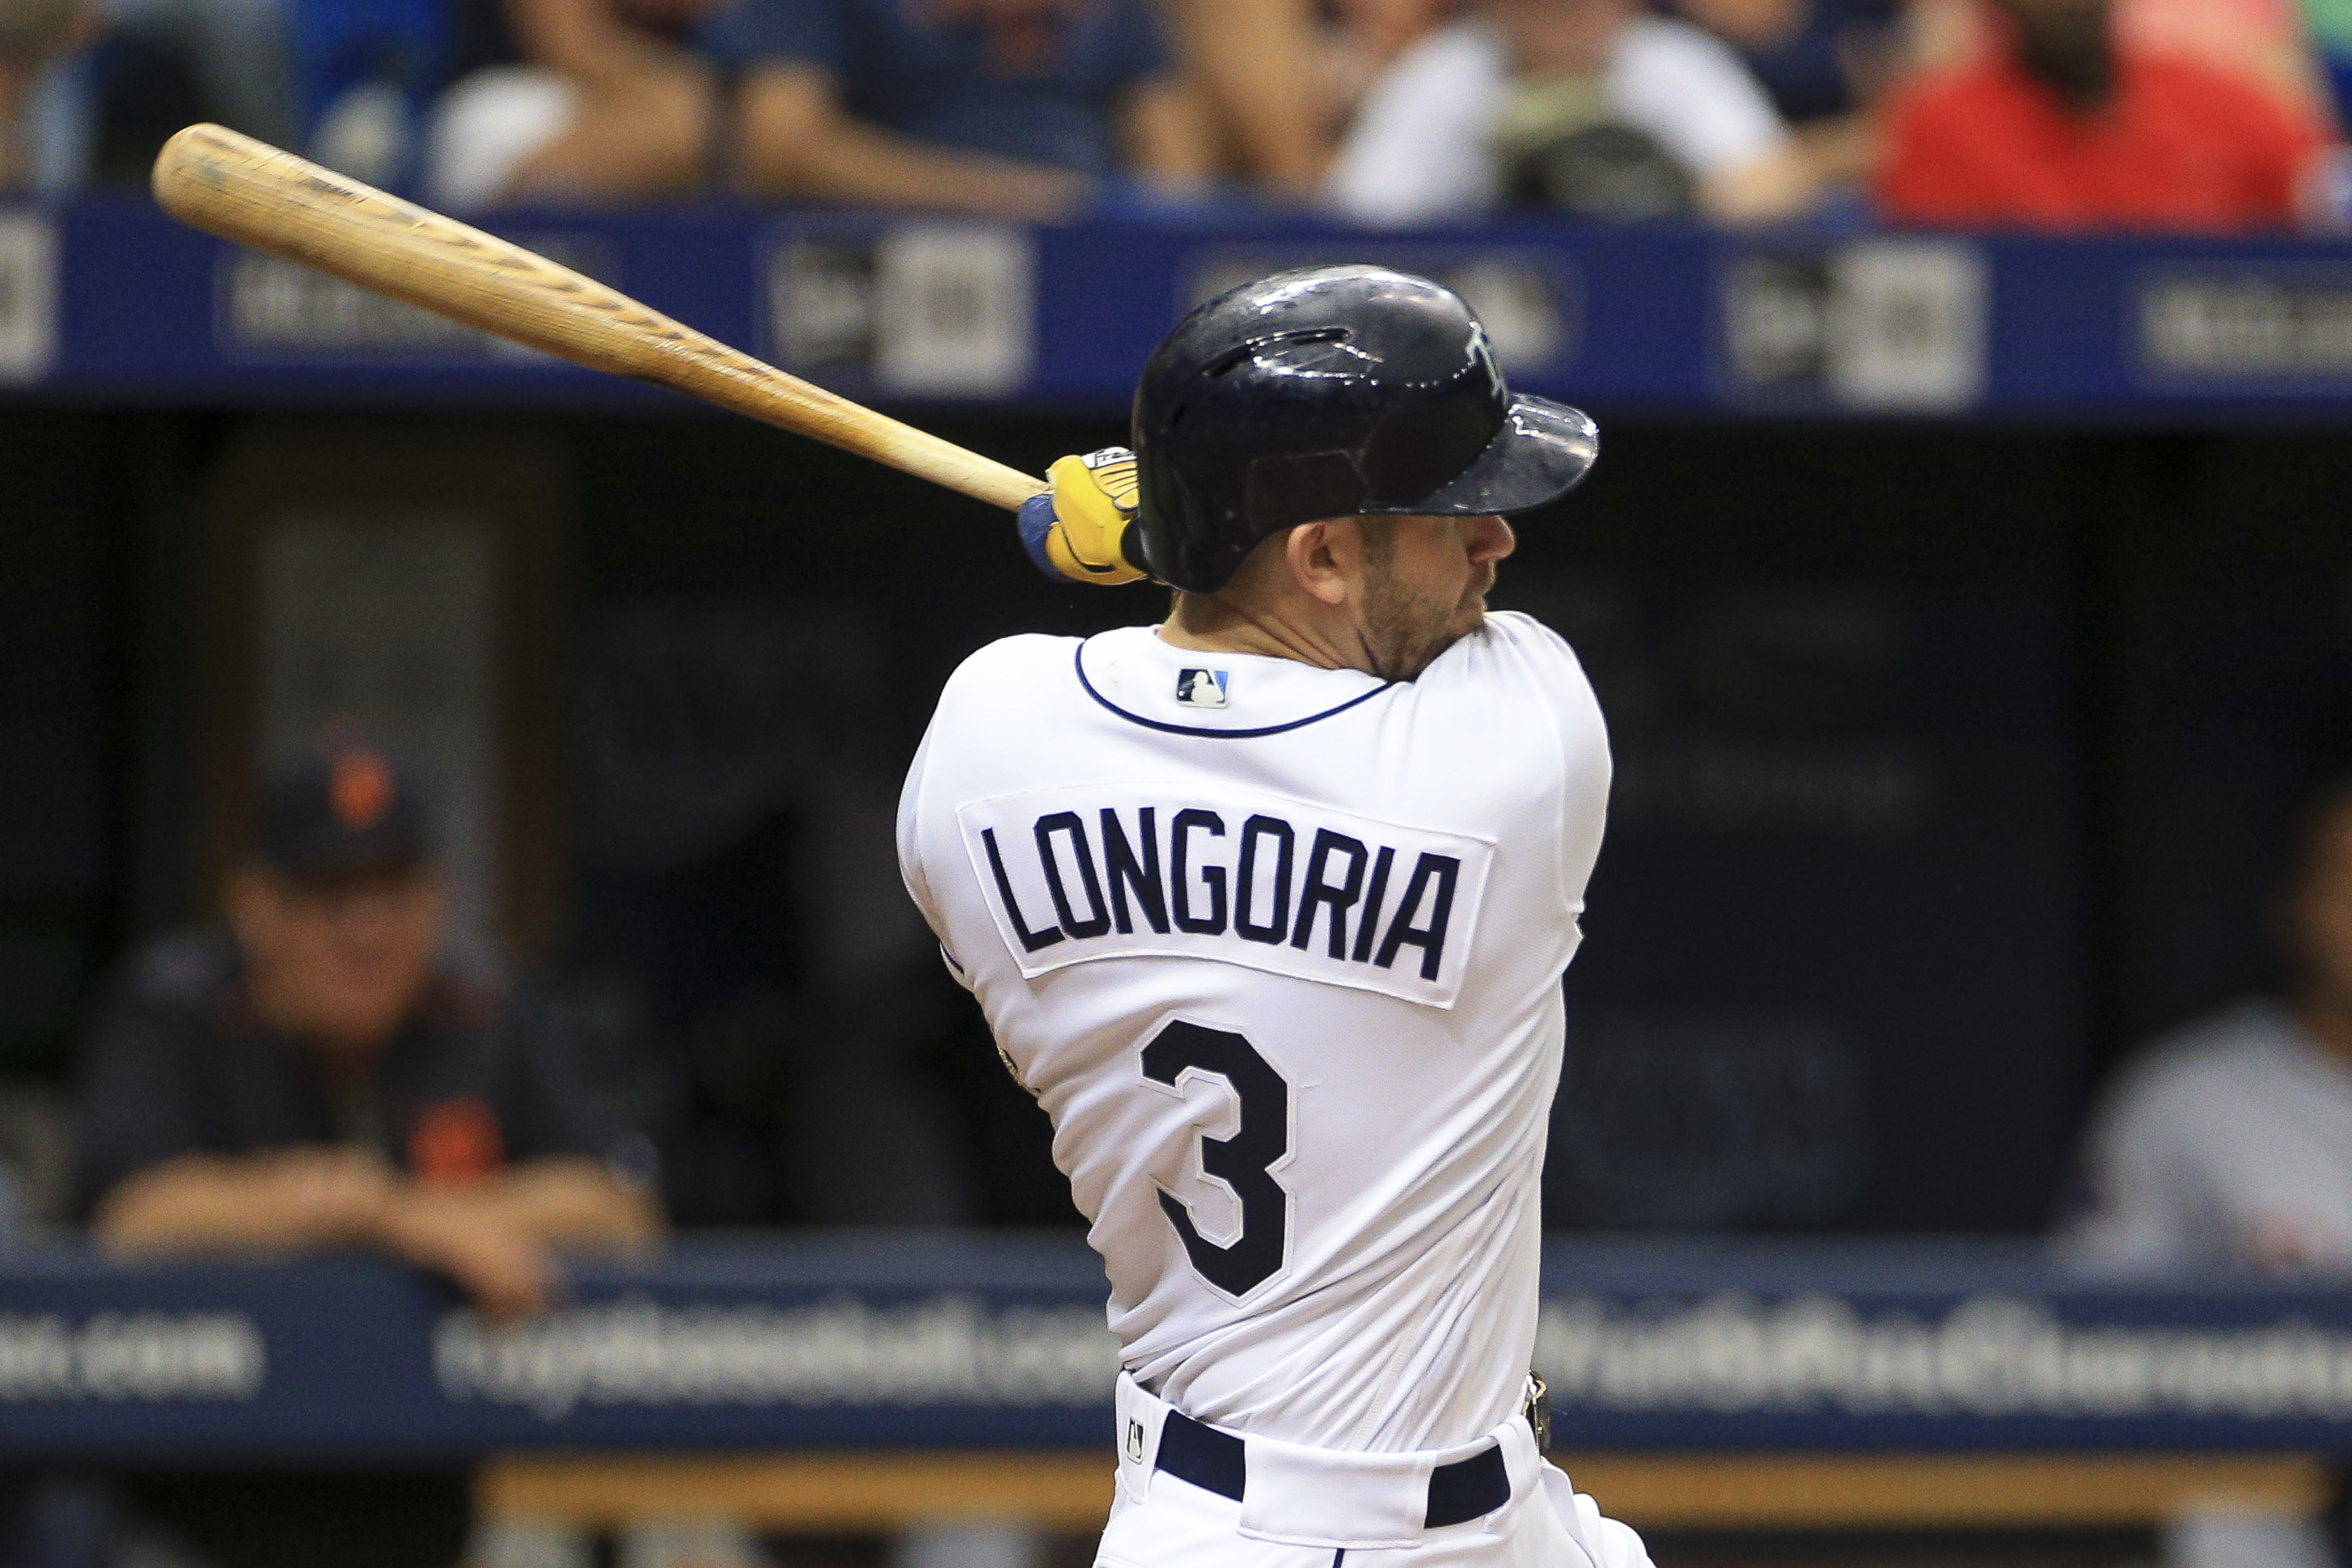 Tampa Bay Rays: Kevin Kiermaier is Not Going Anywhere – Nor Should He